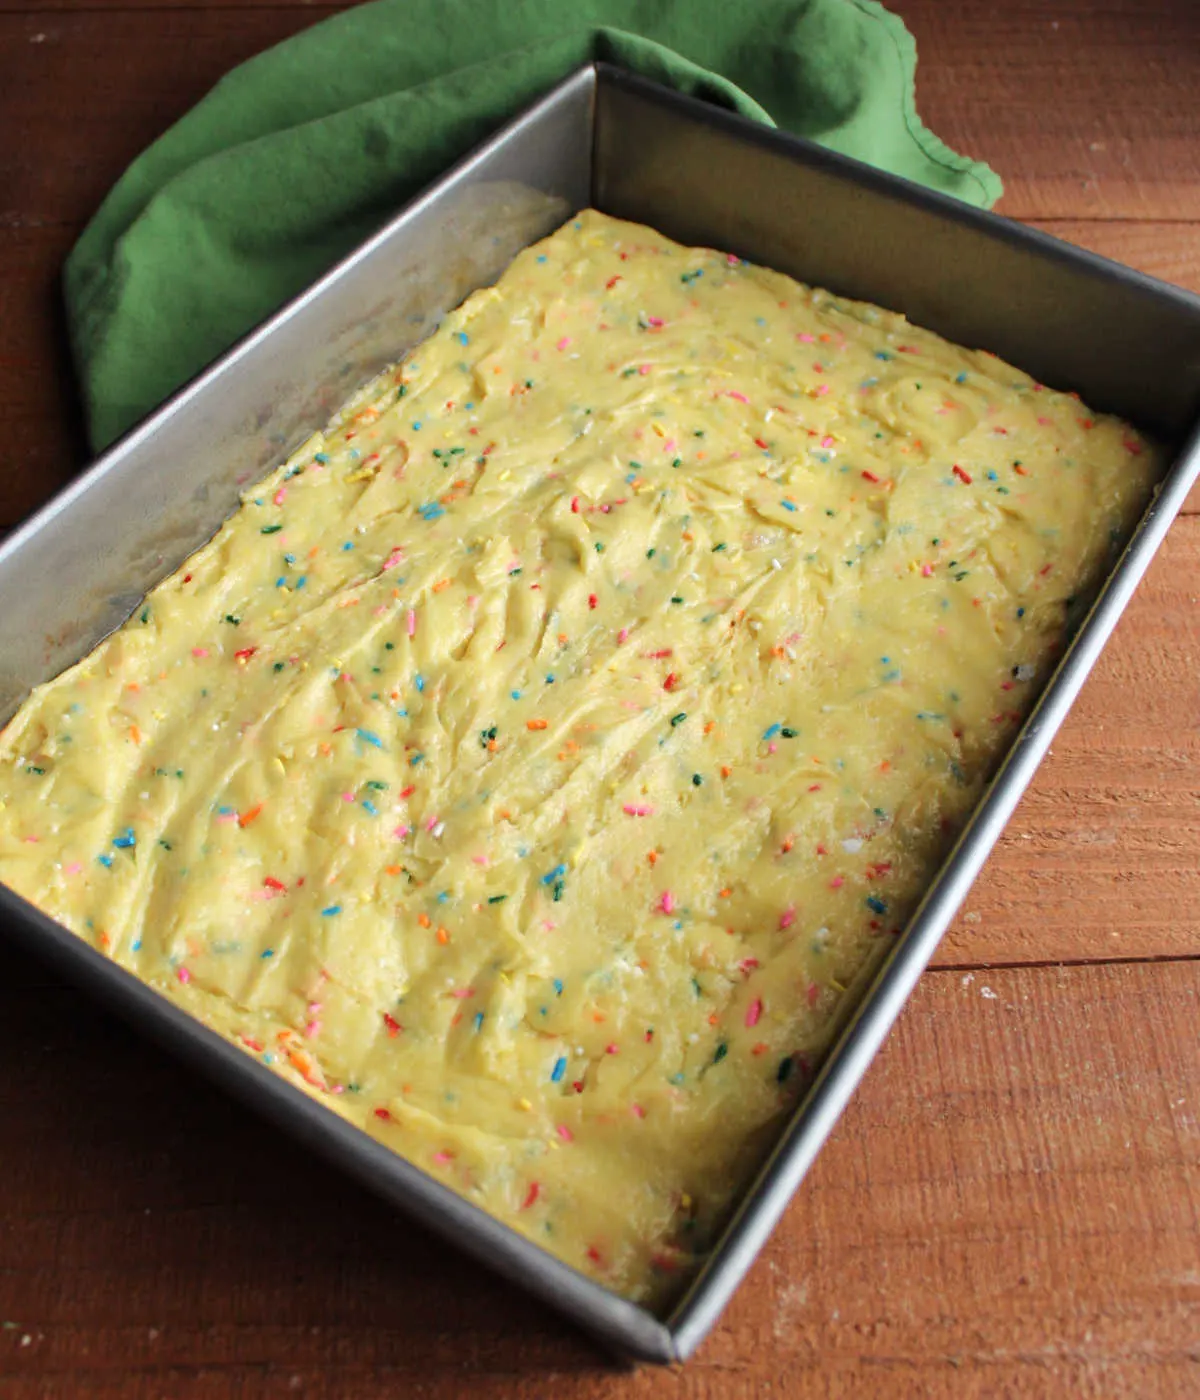 Cake batter dough spread in greased 9x13-inch pan.